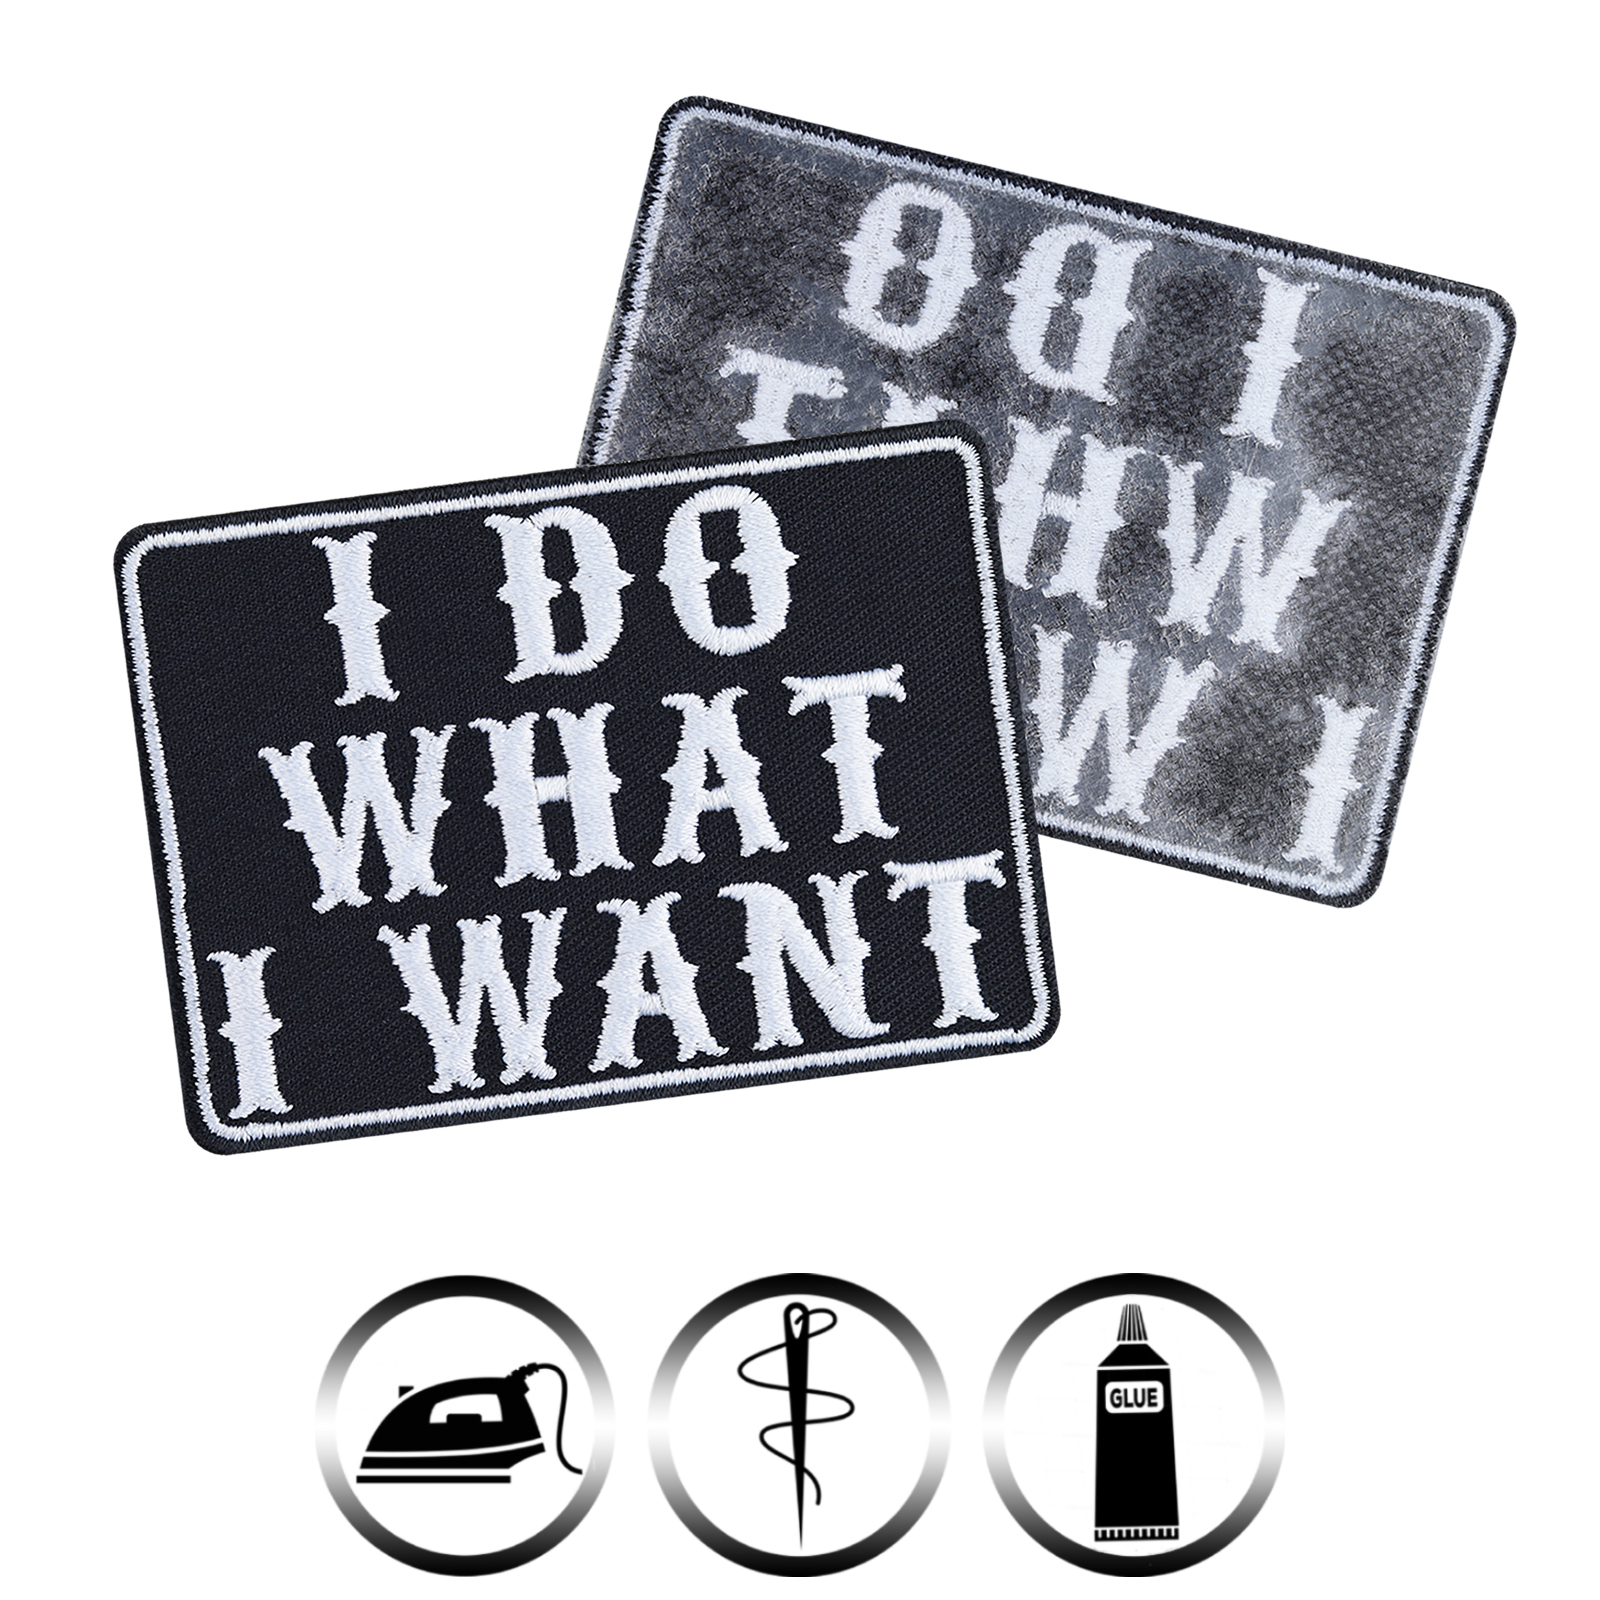 I do what I want - Patch